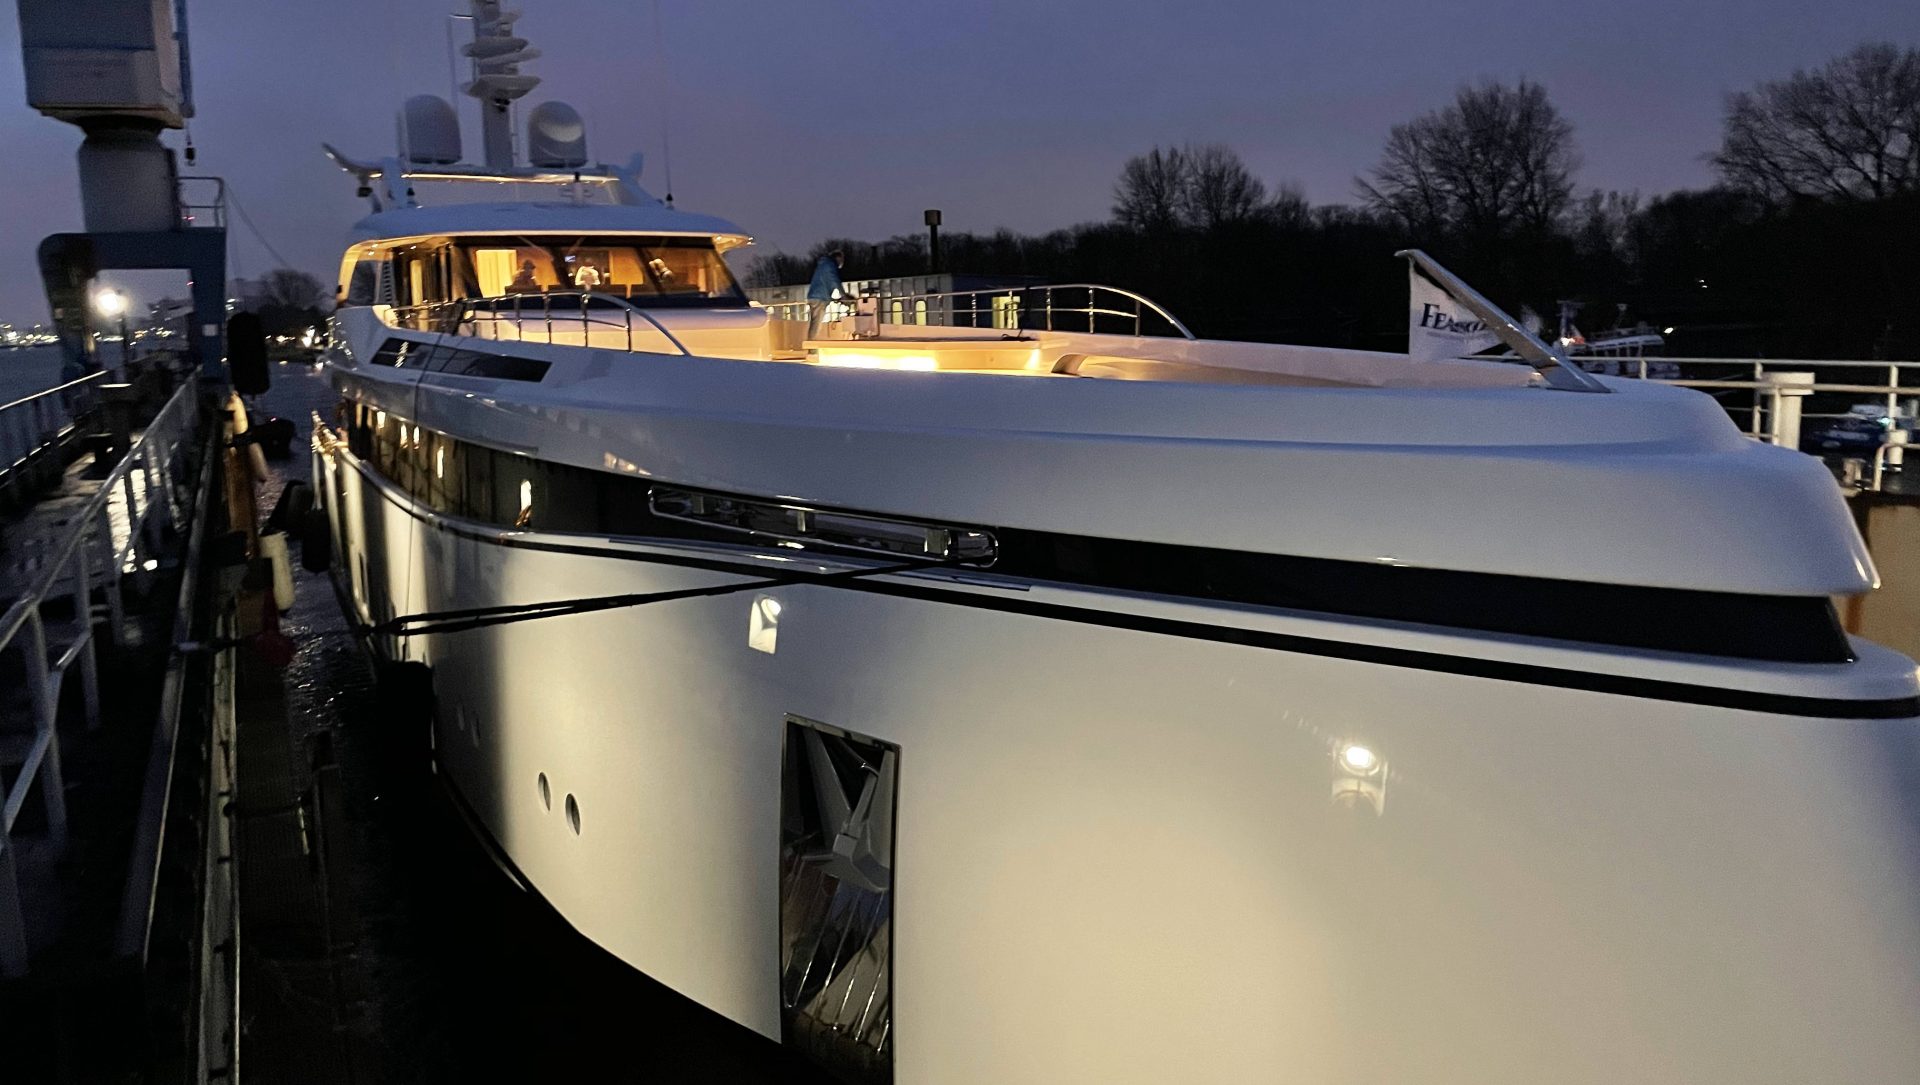 50m | M/Y “Totally Nuts”